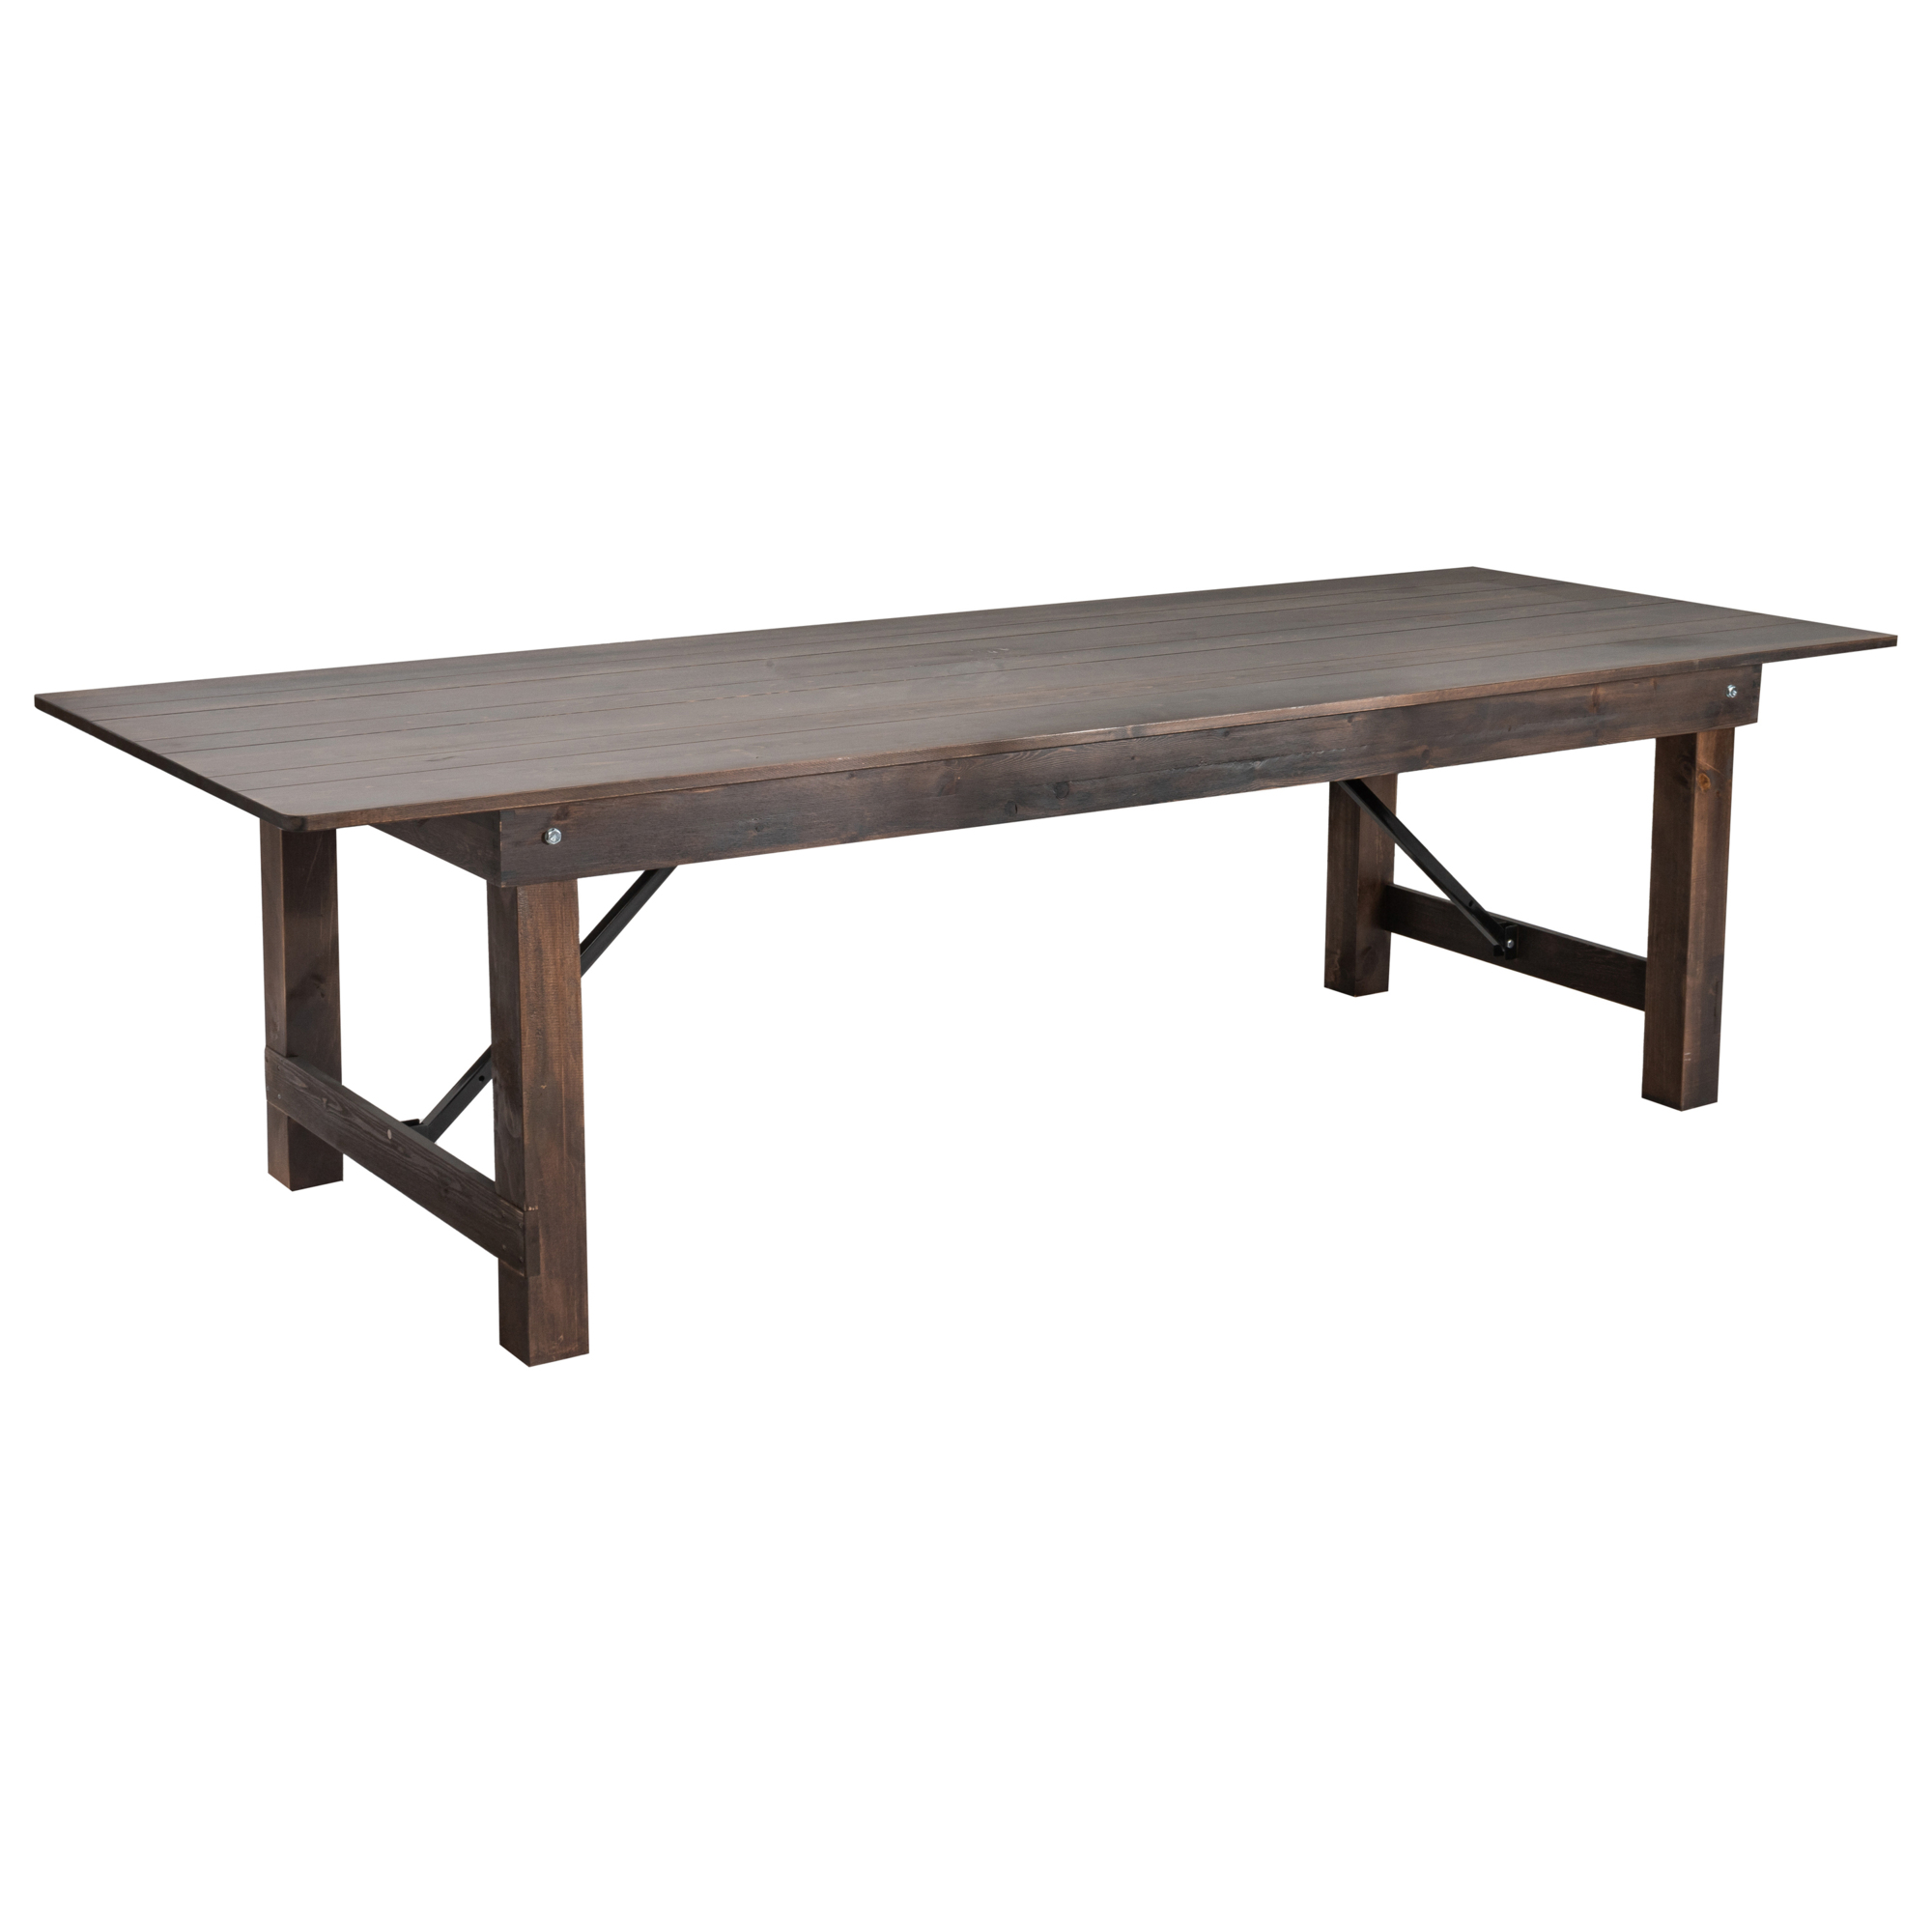 Flash Furniture, 9ft. x 40Inch Mahogany Solid Pine Folding Farm Table, Height 30 in, Width 40 in, Length 108 in, Model XAF108X40MG